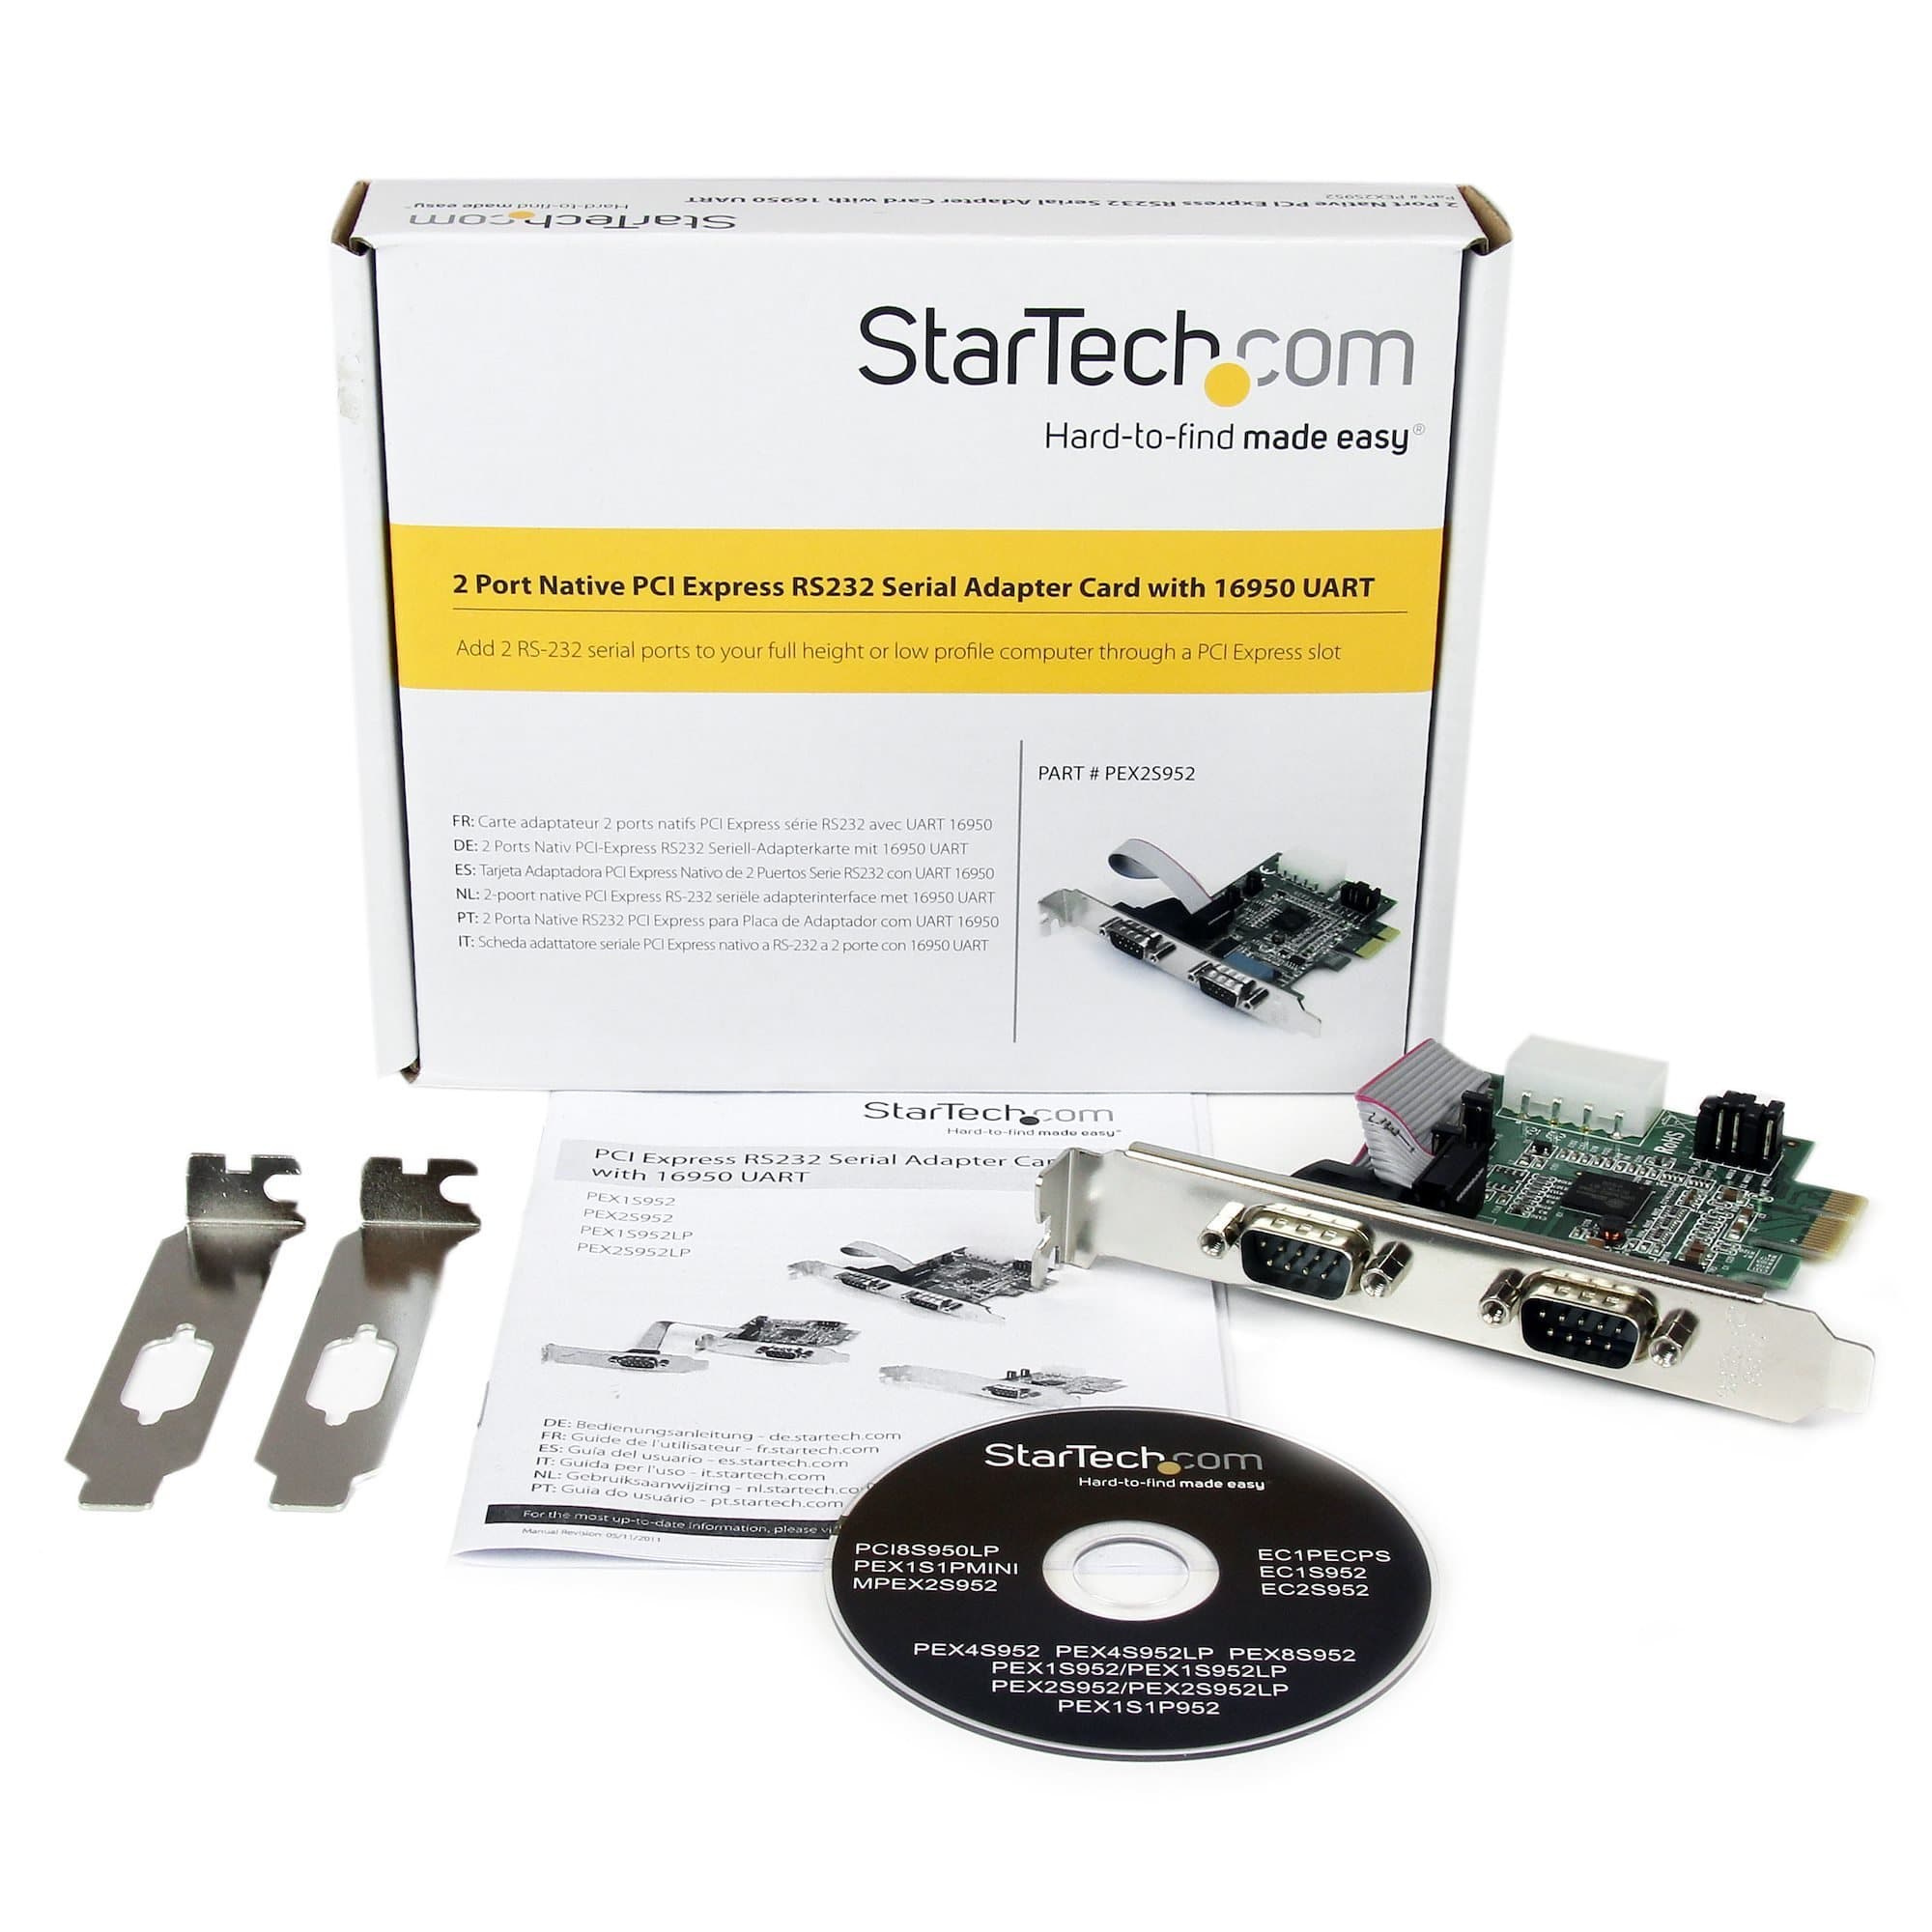 StarTech 2 Port Native PCI Express RS232 Serial Adapter Card with 16950 UART PEX2S952 - Buy Singapore